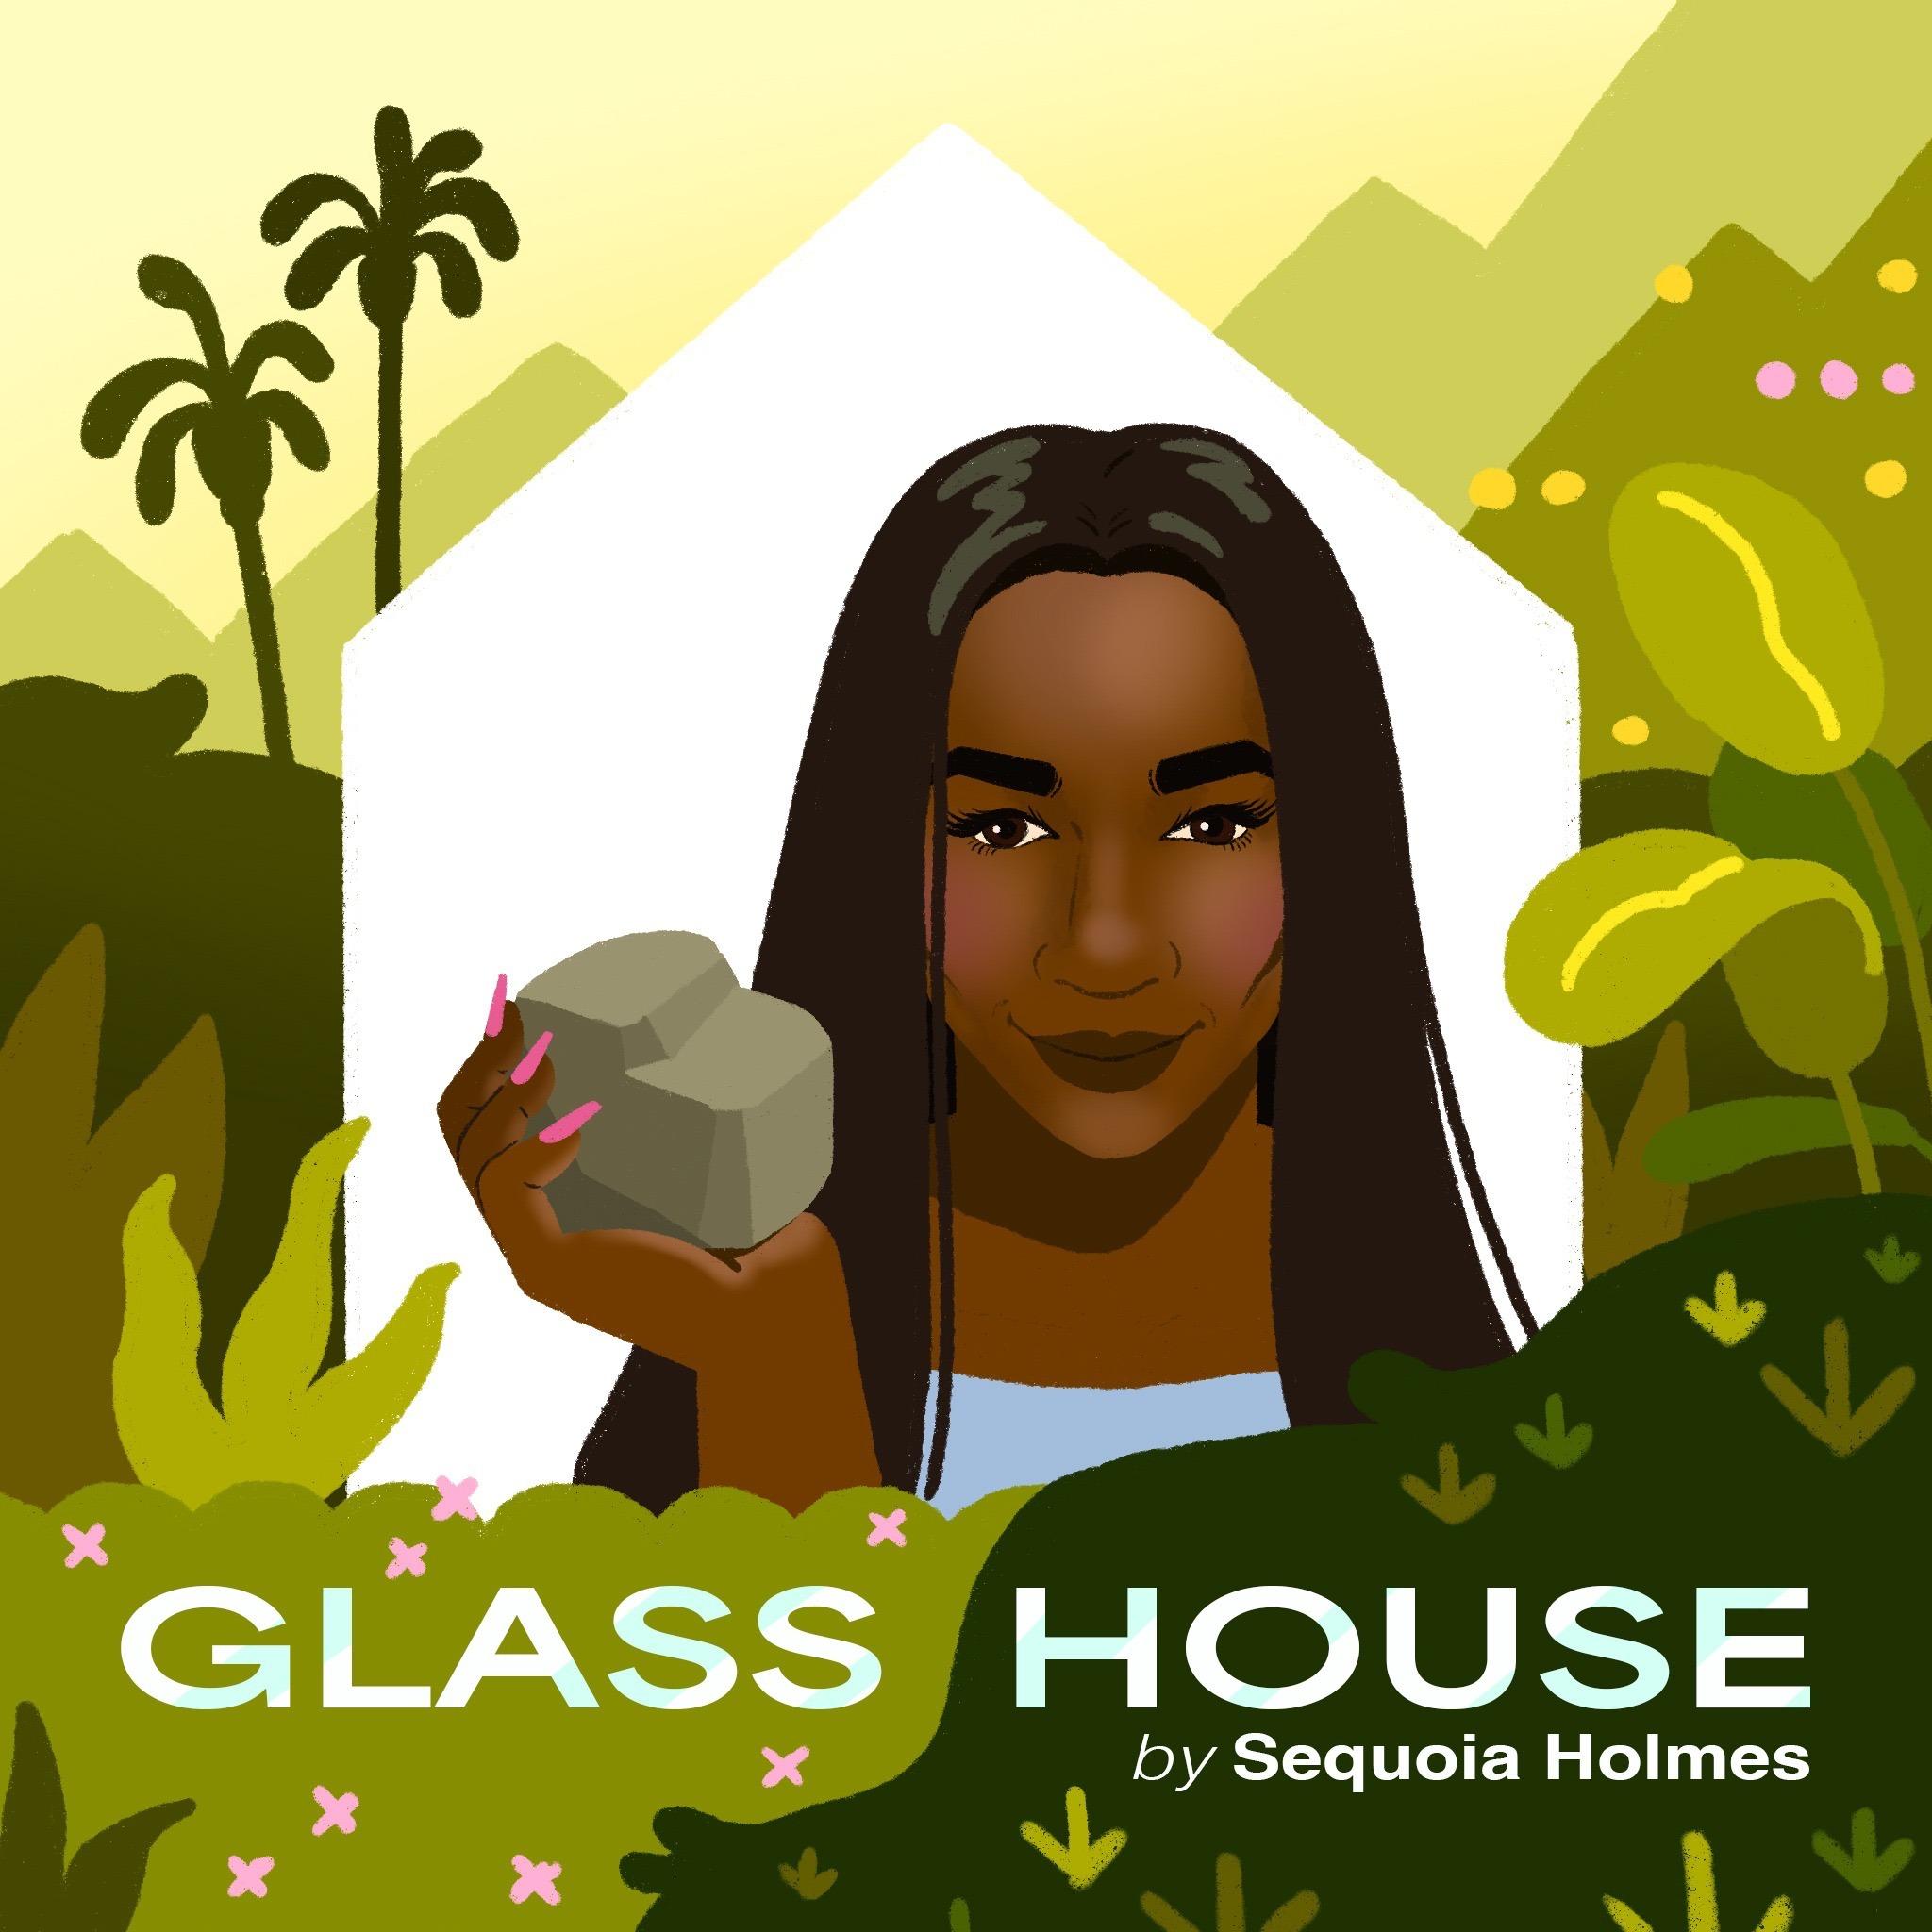 Glass House by Sequoia Holmes